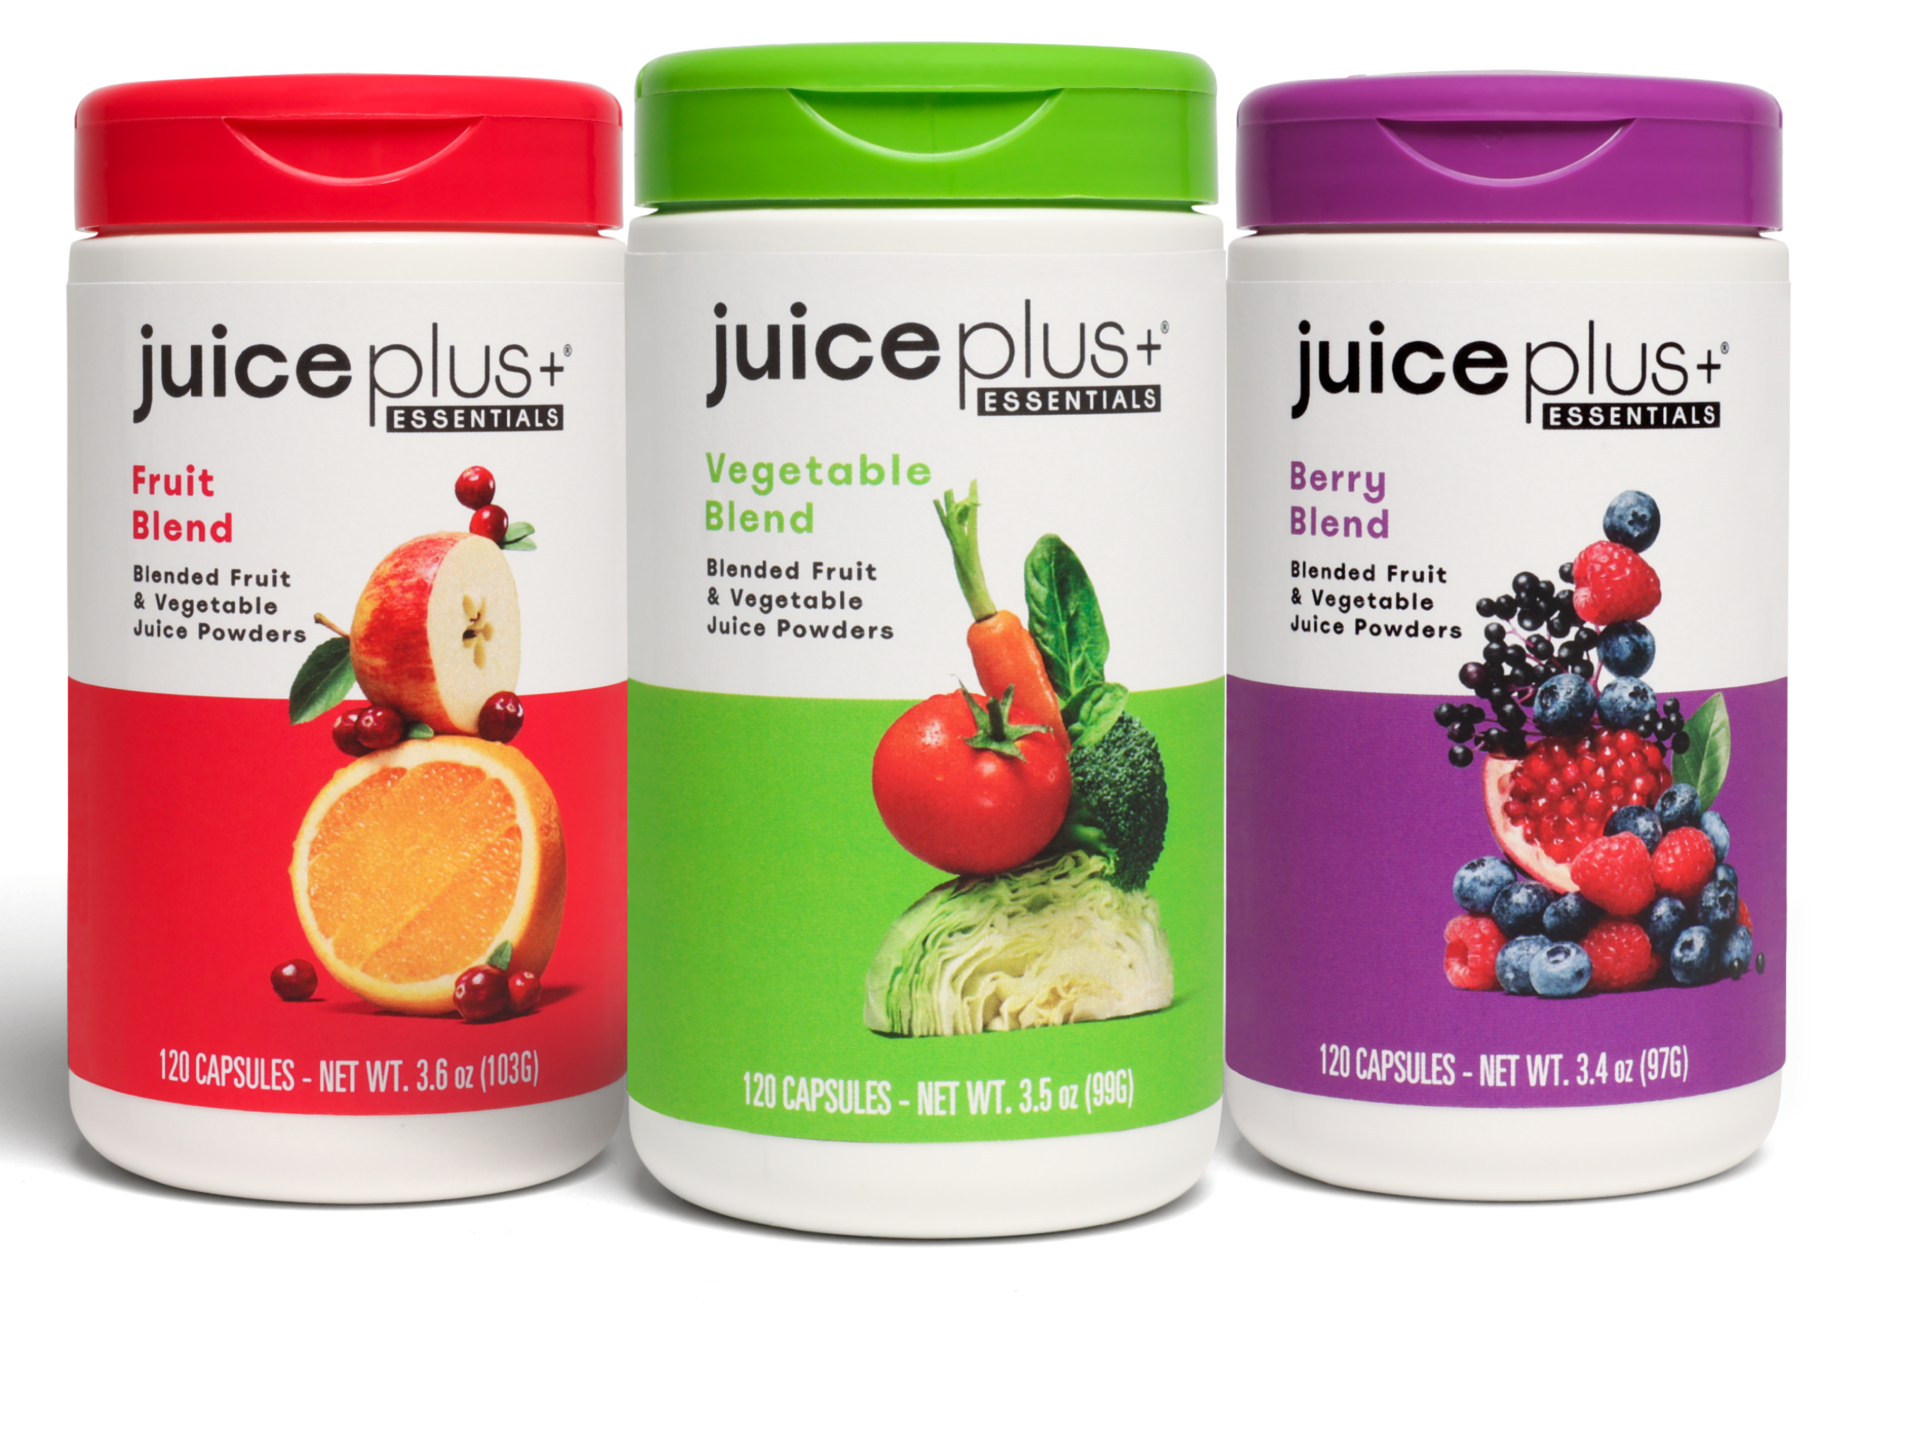 Juice Plus+ products for sale